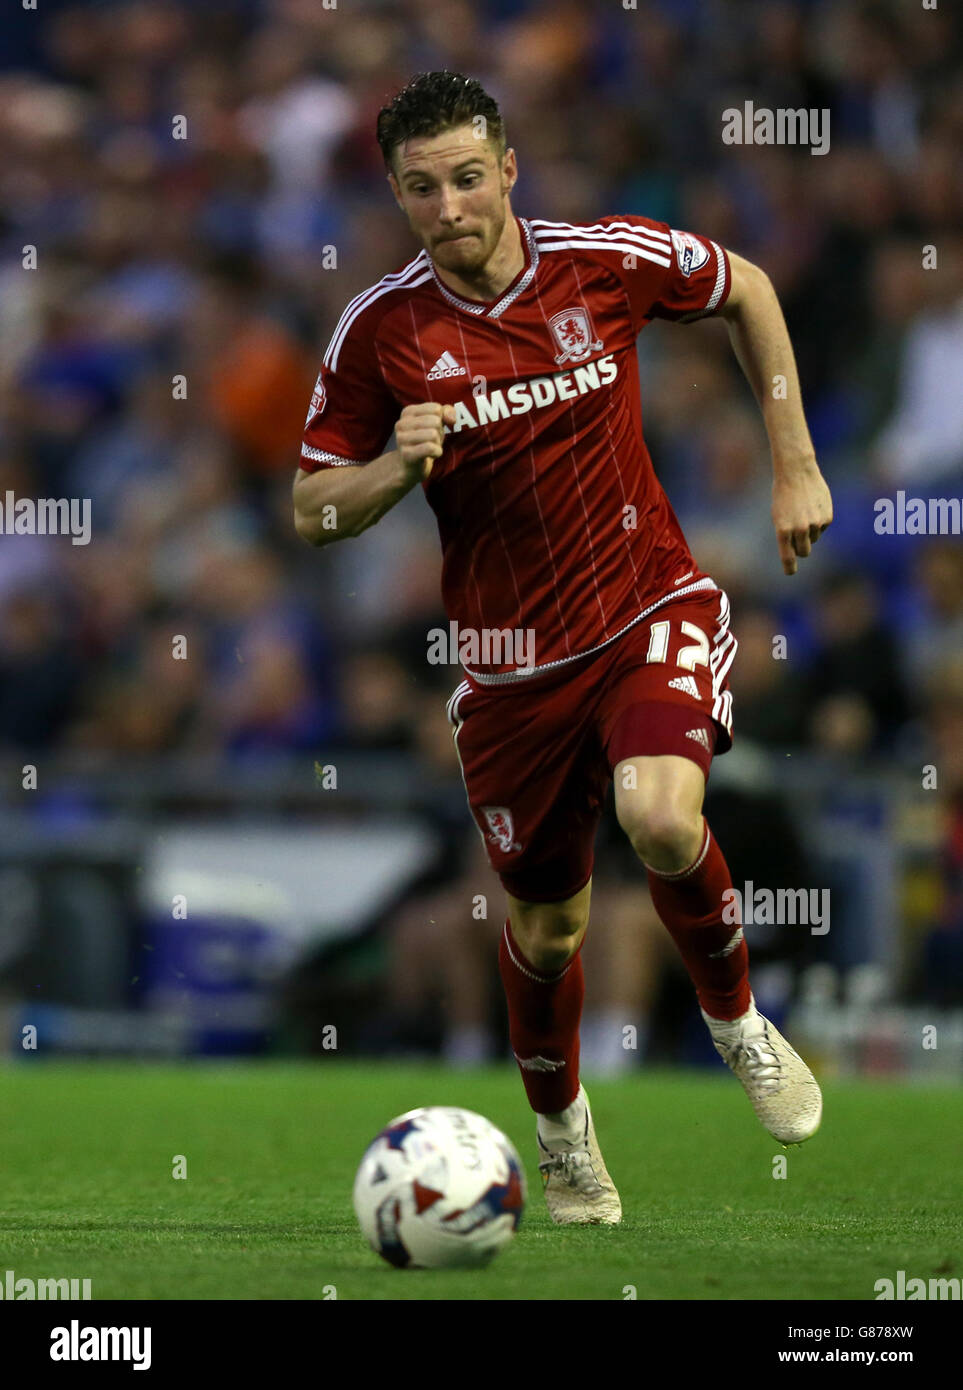 Middlesbrough's James Husband during the Capital One Cup, First Round match at Boundary Park, Oldham. PRESS ASSOCIATION Photo. Picture date: Wednesday August 12, 2015. See PA story SOCCER Oldham. Photo credit should read: Simon Cooper/PA Wire. No use with unauthorised audio, video, data, fixture lists, club/league logos or "live" services. Online in-match use limited to 45 images, no video emulation. No use in betting, games or single club/league/player publications. Stock Photo